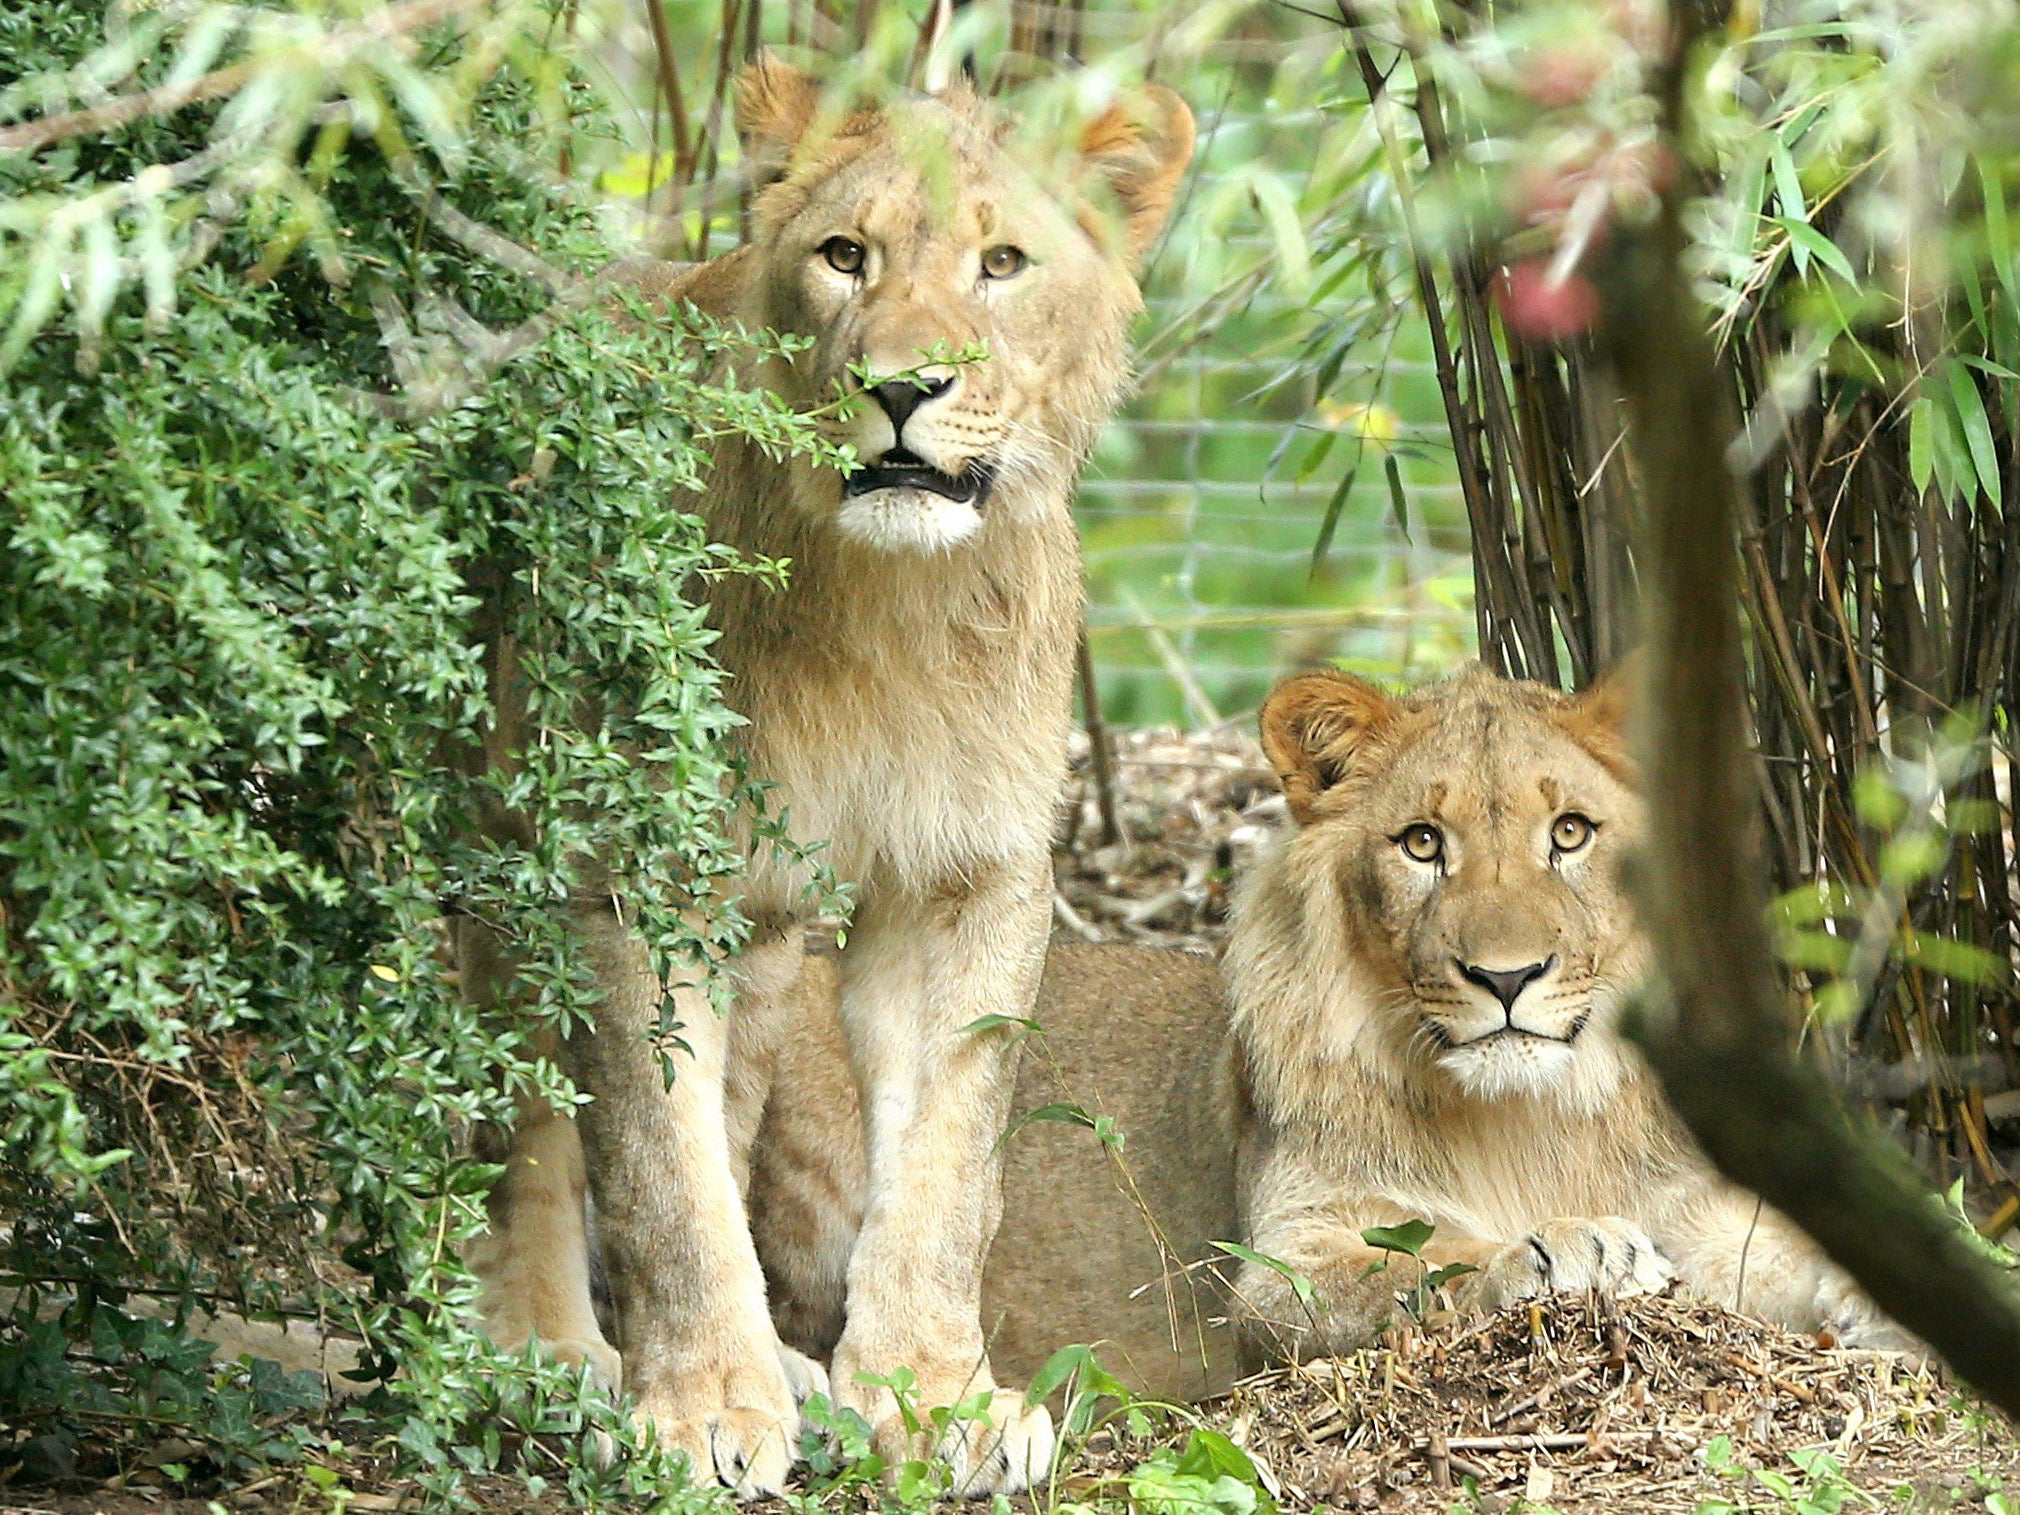 Motshegetsi (left) and Majo in their enclosure at the zoo in Leipzig on 20 September